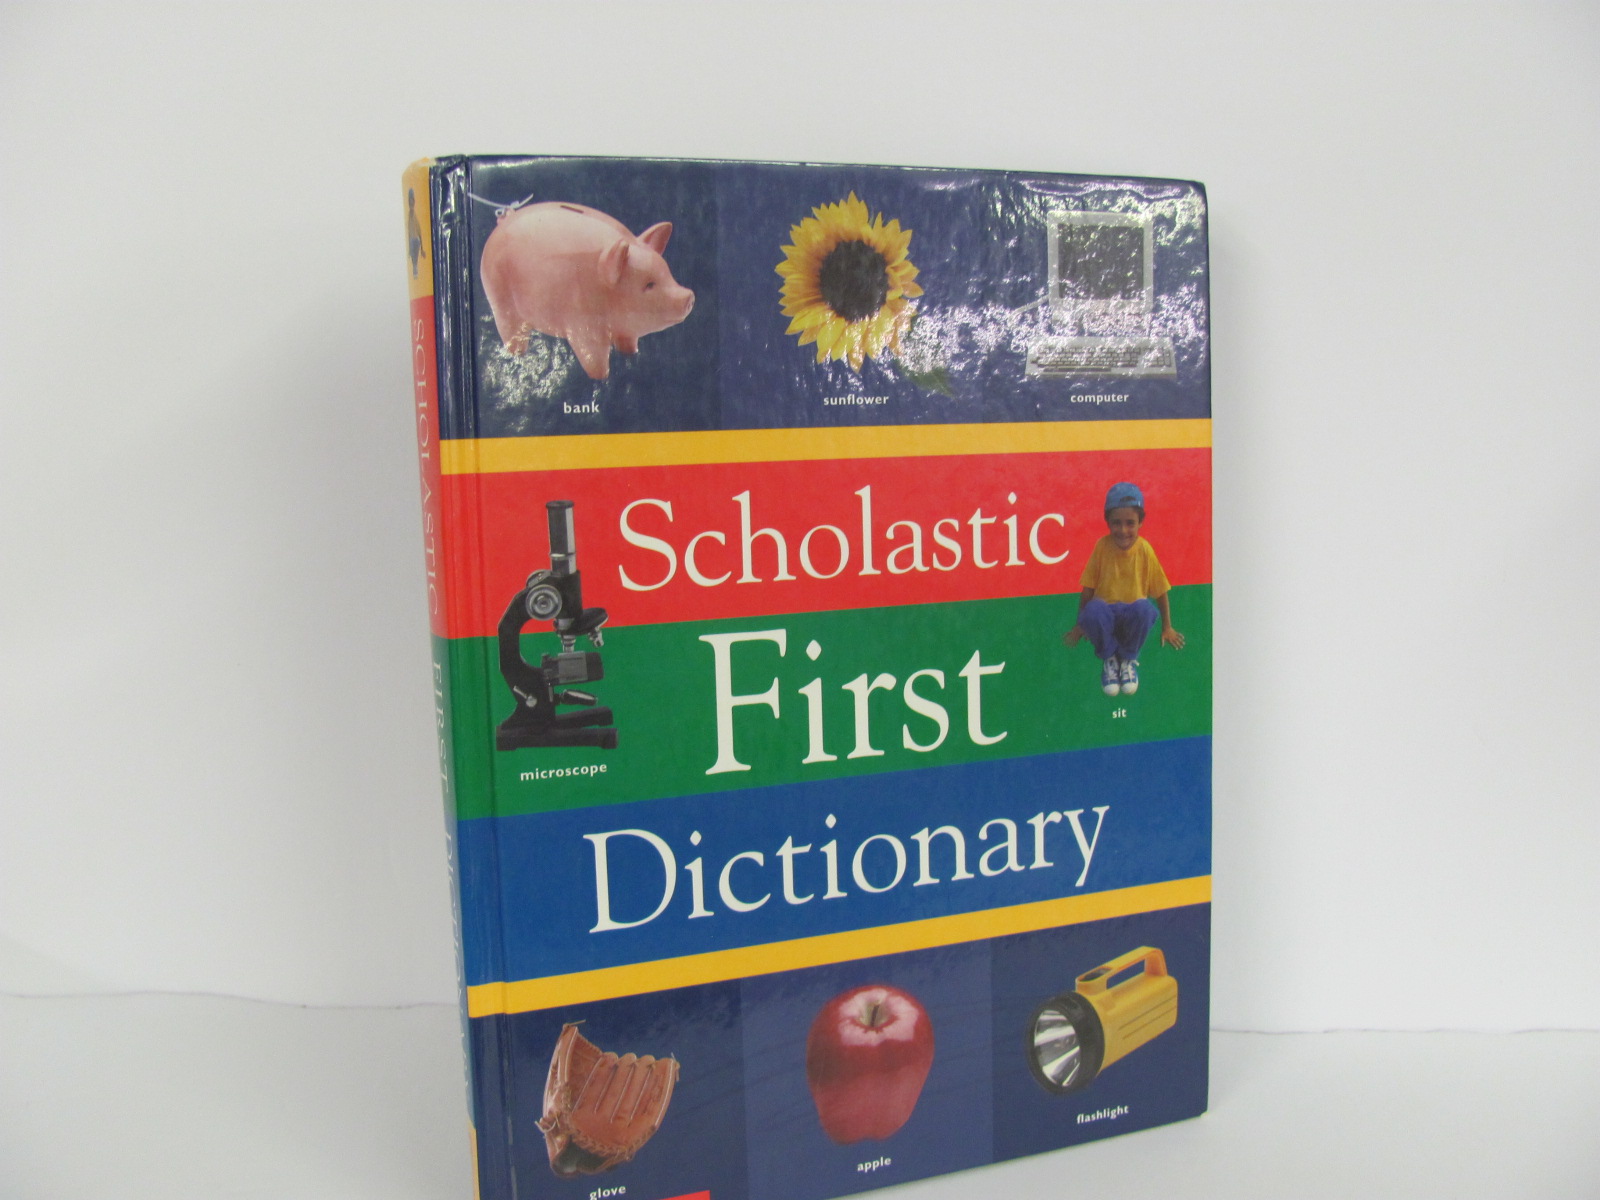 Scholastic-First-Dictionary-Used-Dictionary_316042A.jpg